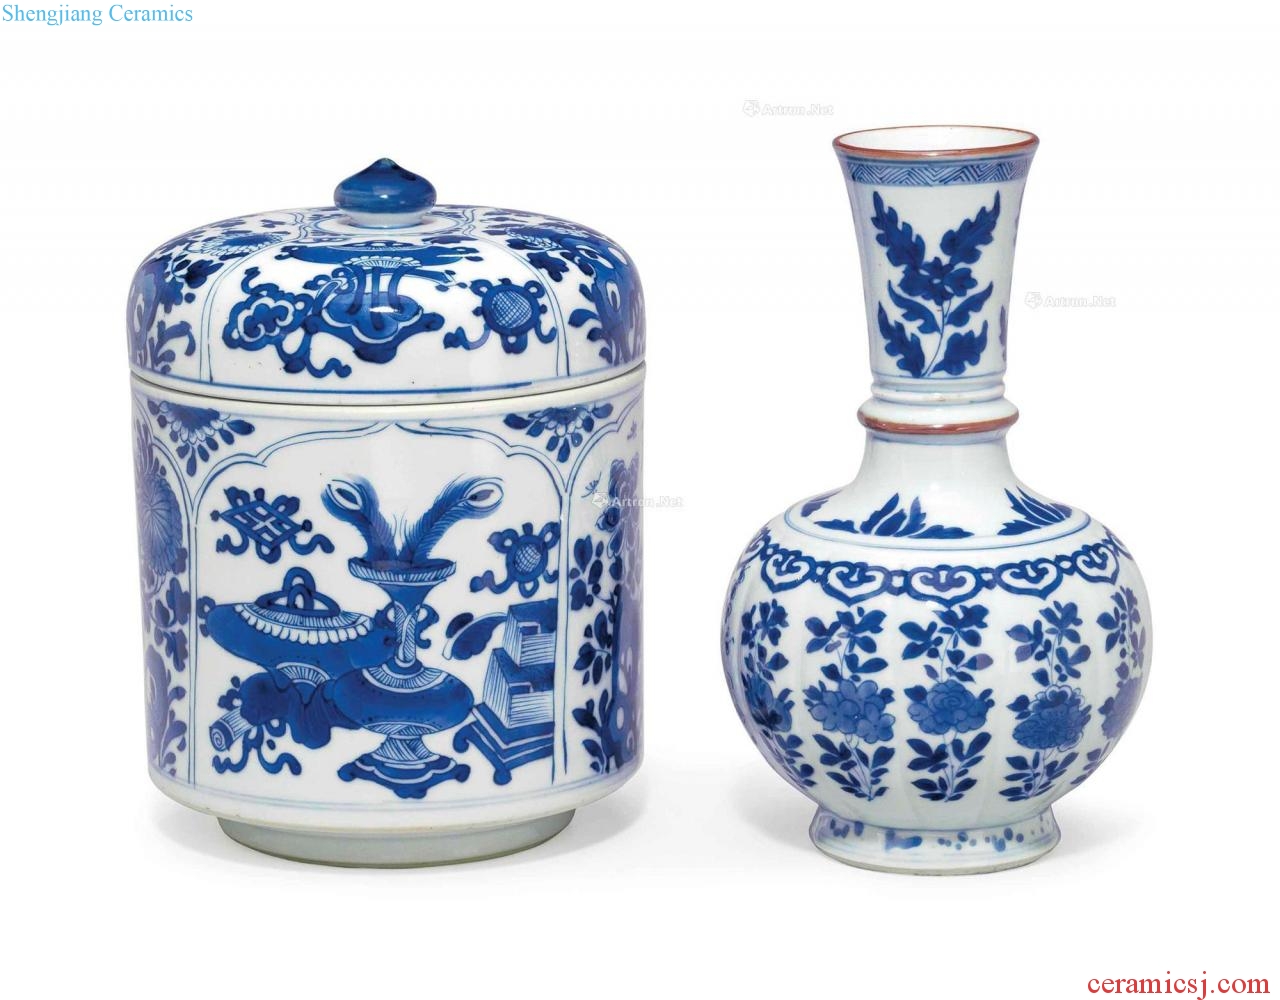 Kangxi period, 1662-1722 - A BLUE AND WHITE JAR AND COVER the AND VASE